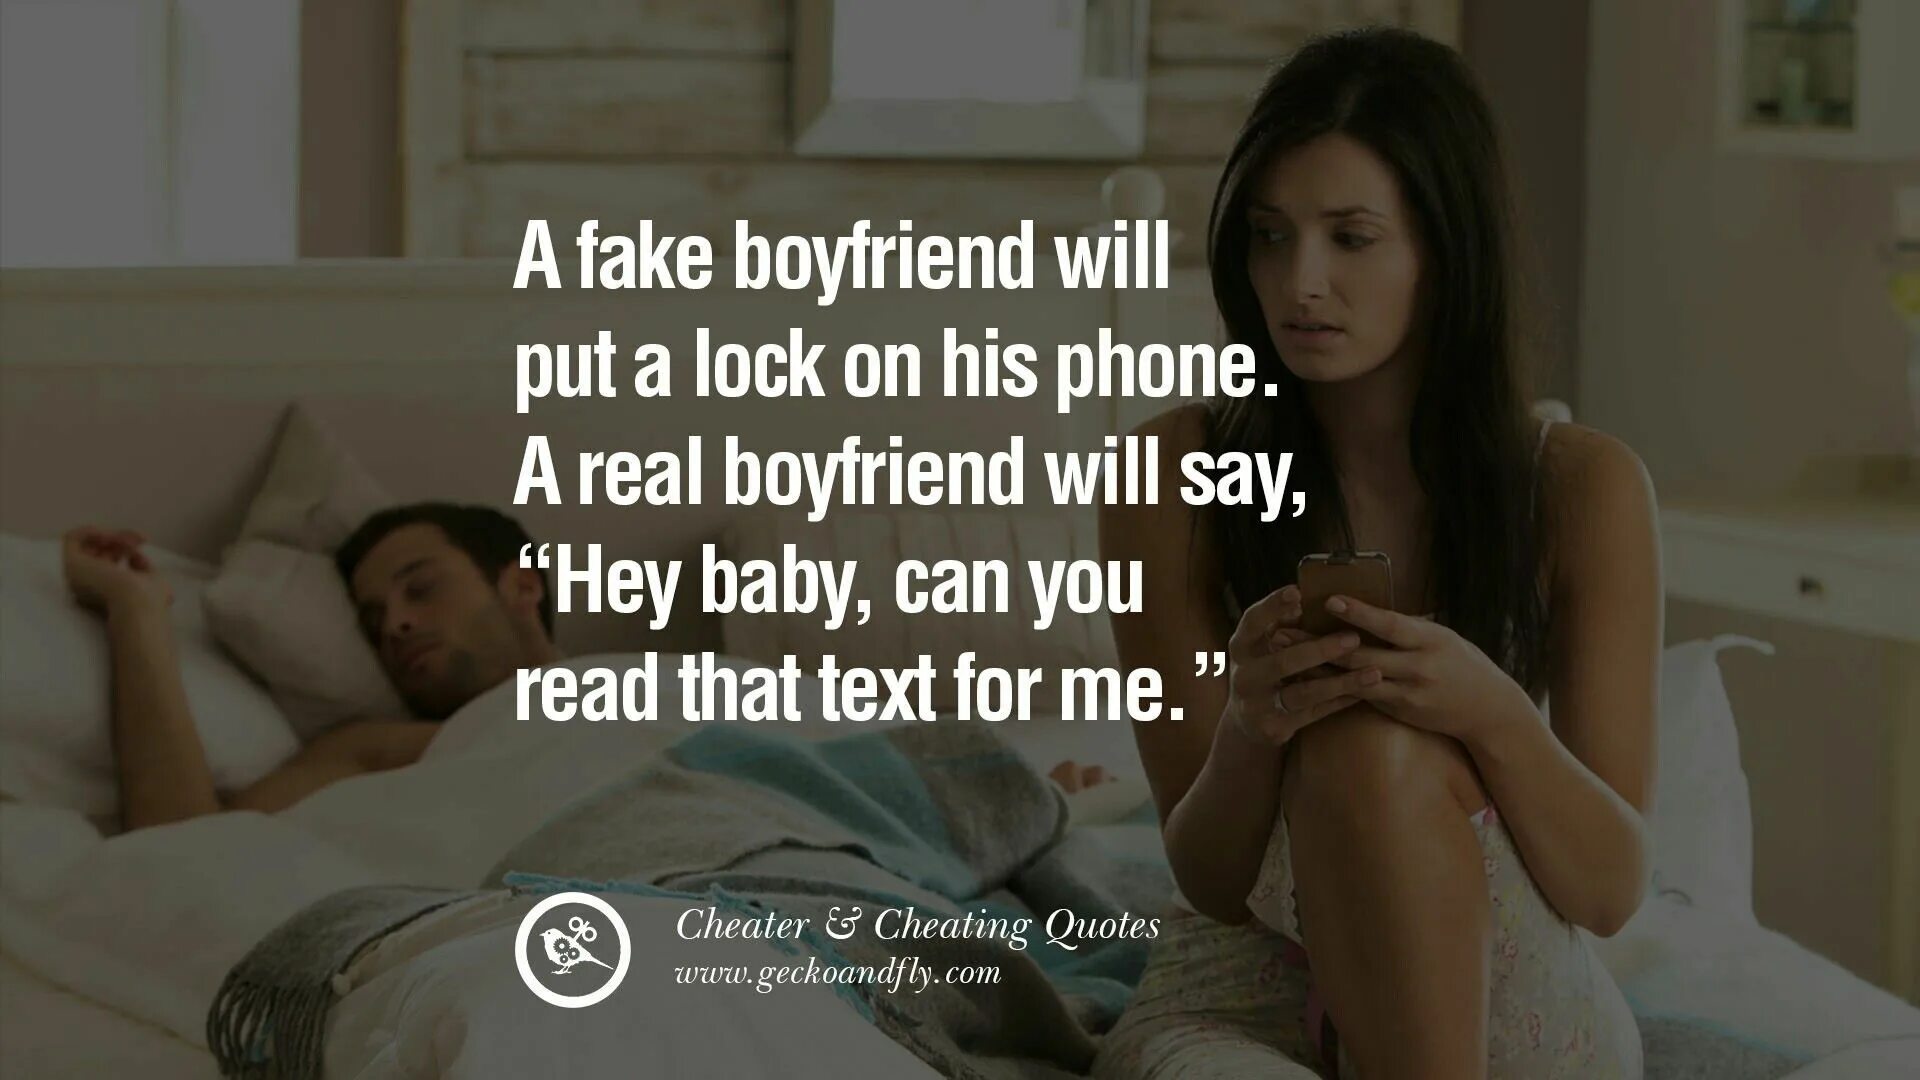 Cheating husband Cheat. Quotes about cheating. Cheating boyfriend. Cheating on boyfriend.